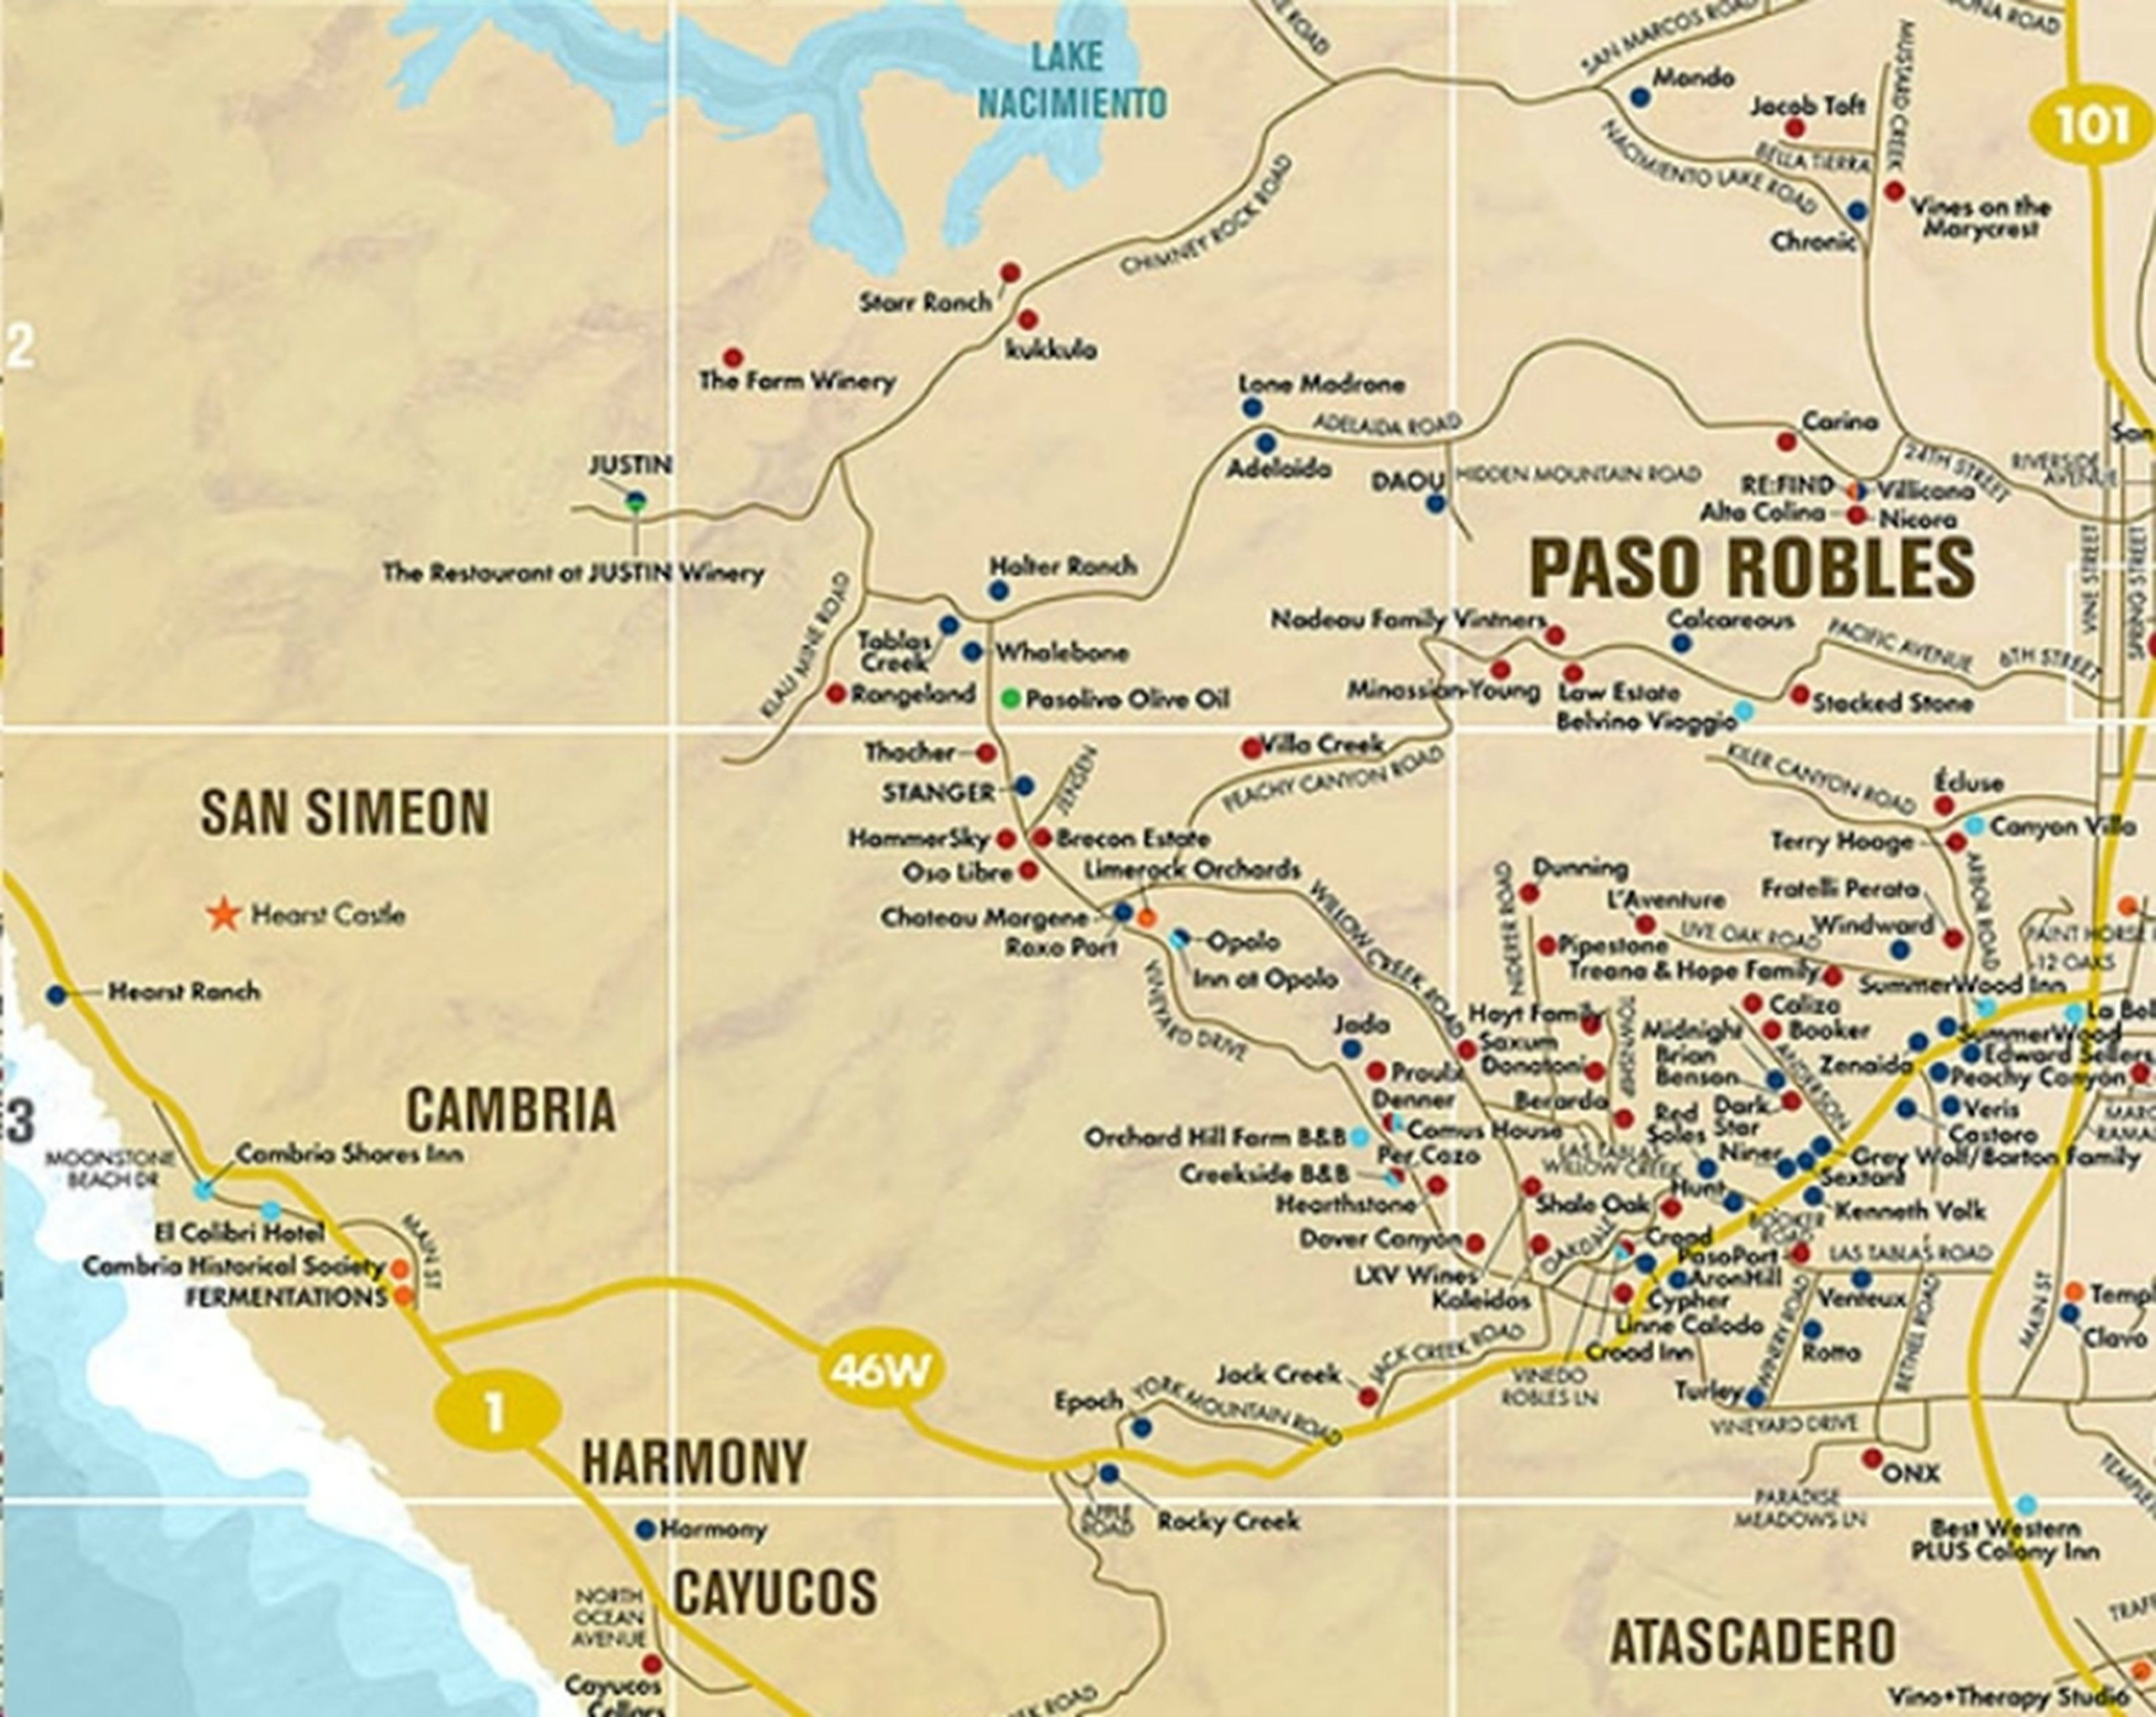 Paso Robles Area Wine Tasting Map Paso Robles Wineries 